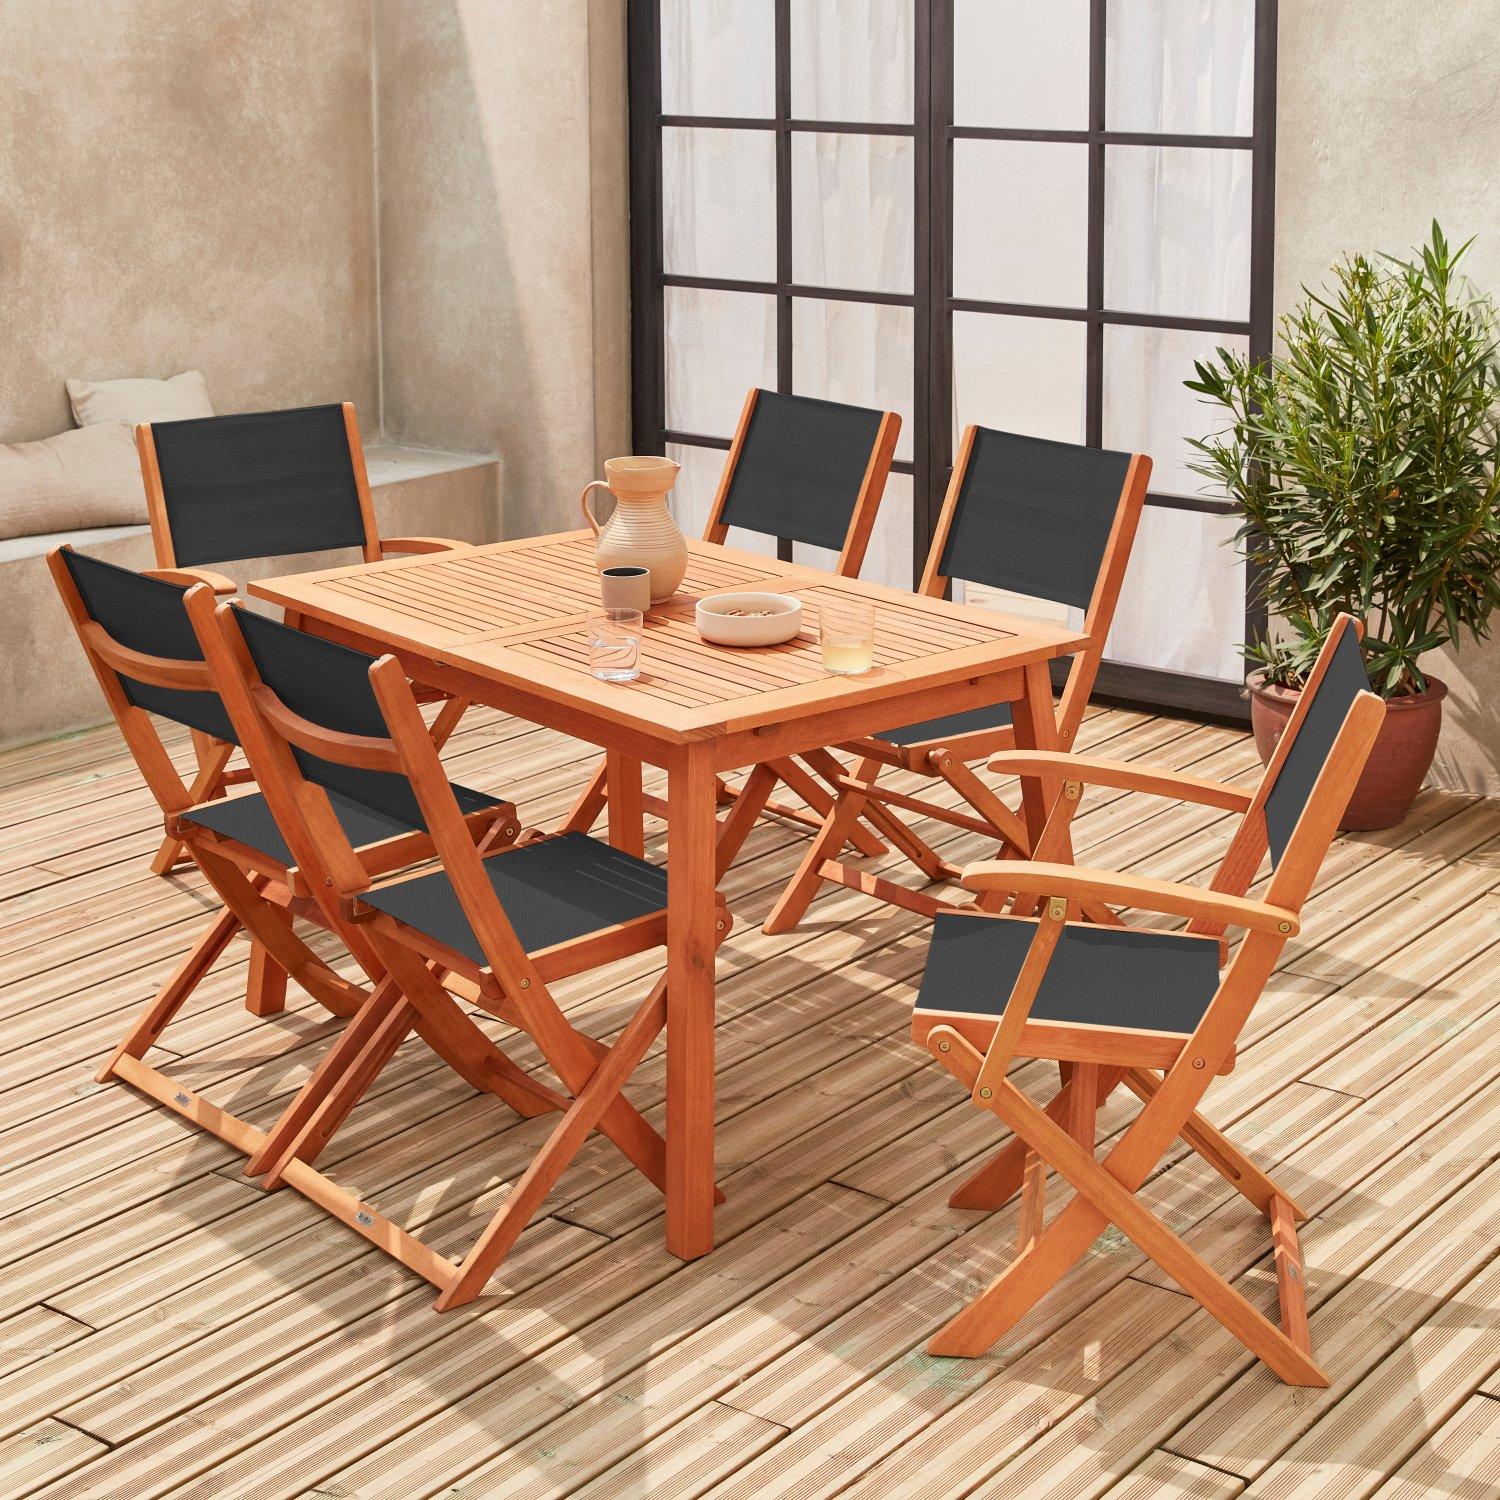 6-seater Extendable Wooden Garden Table Set With Chairs